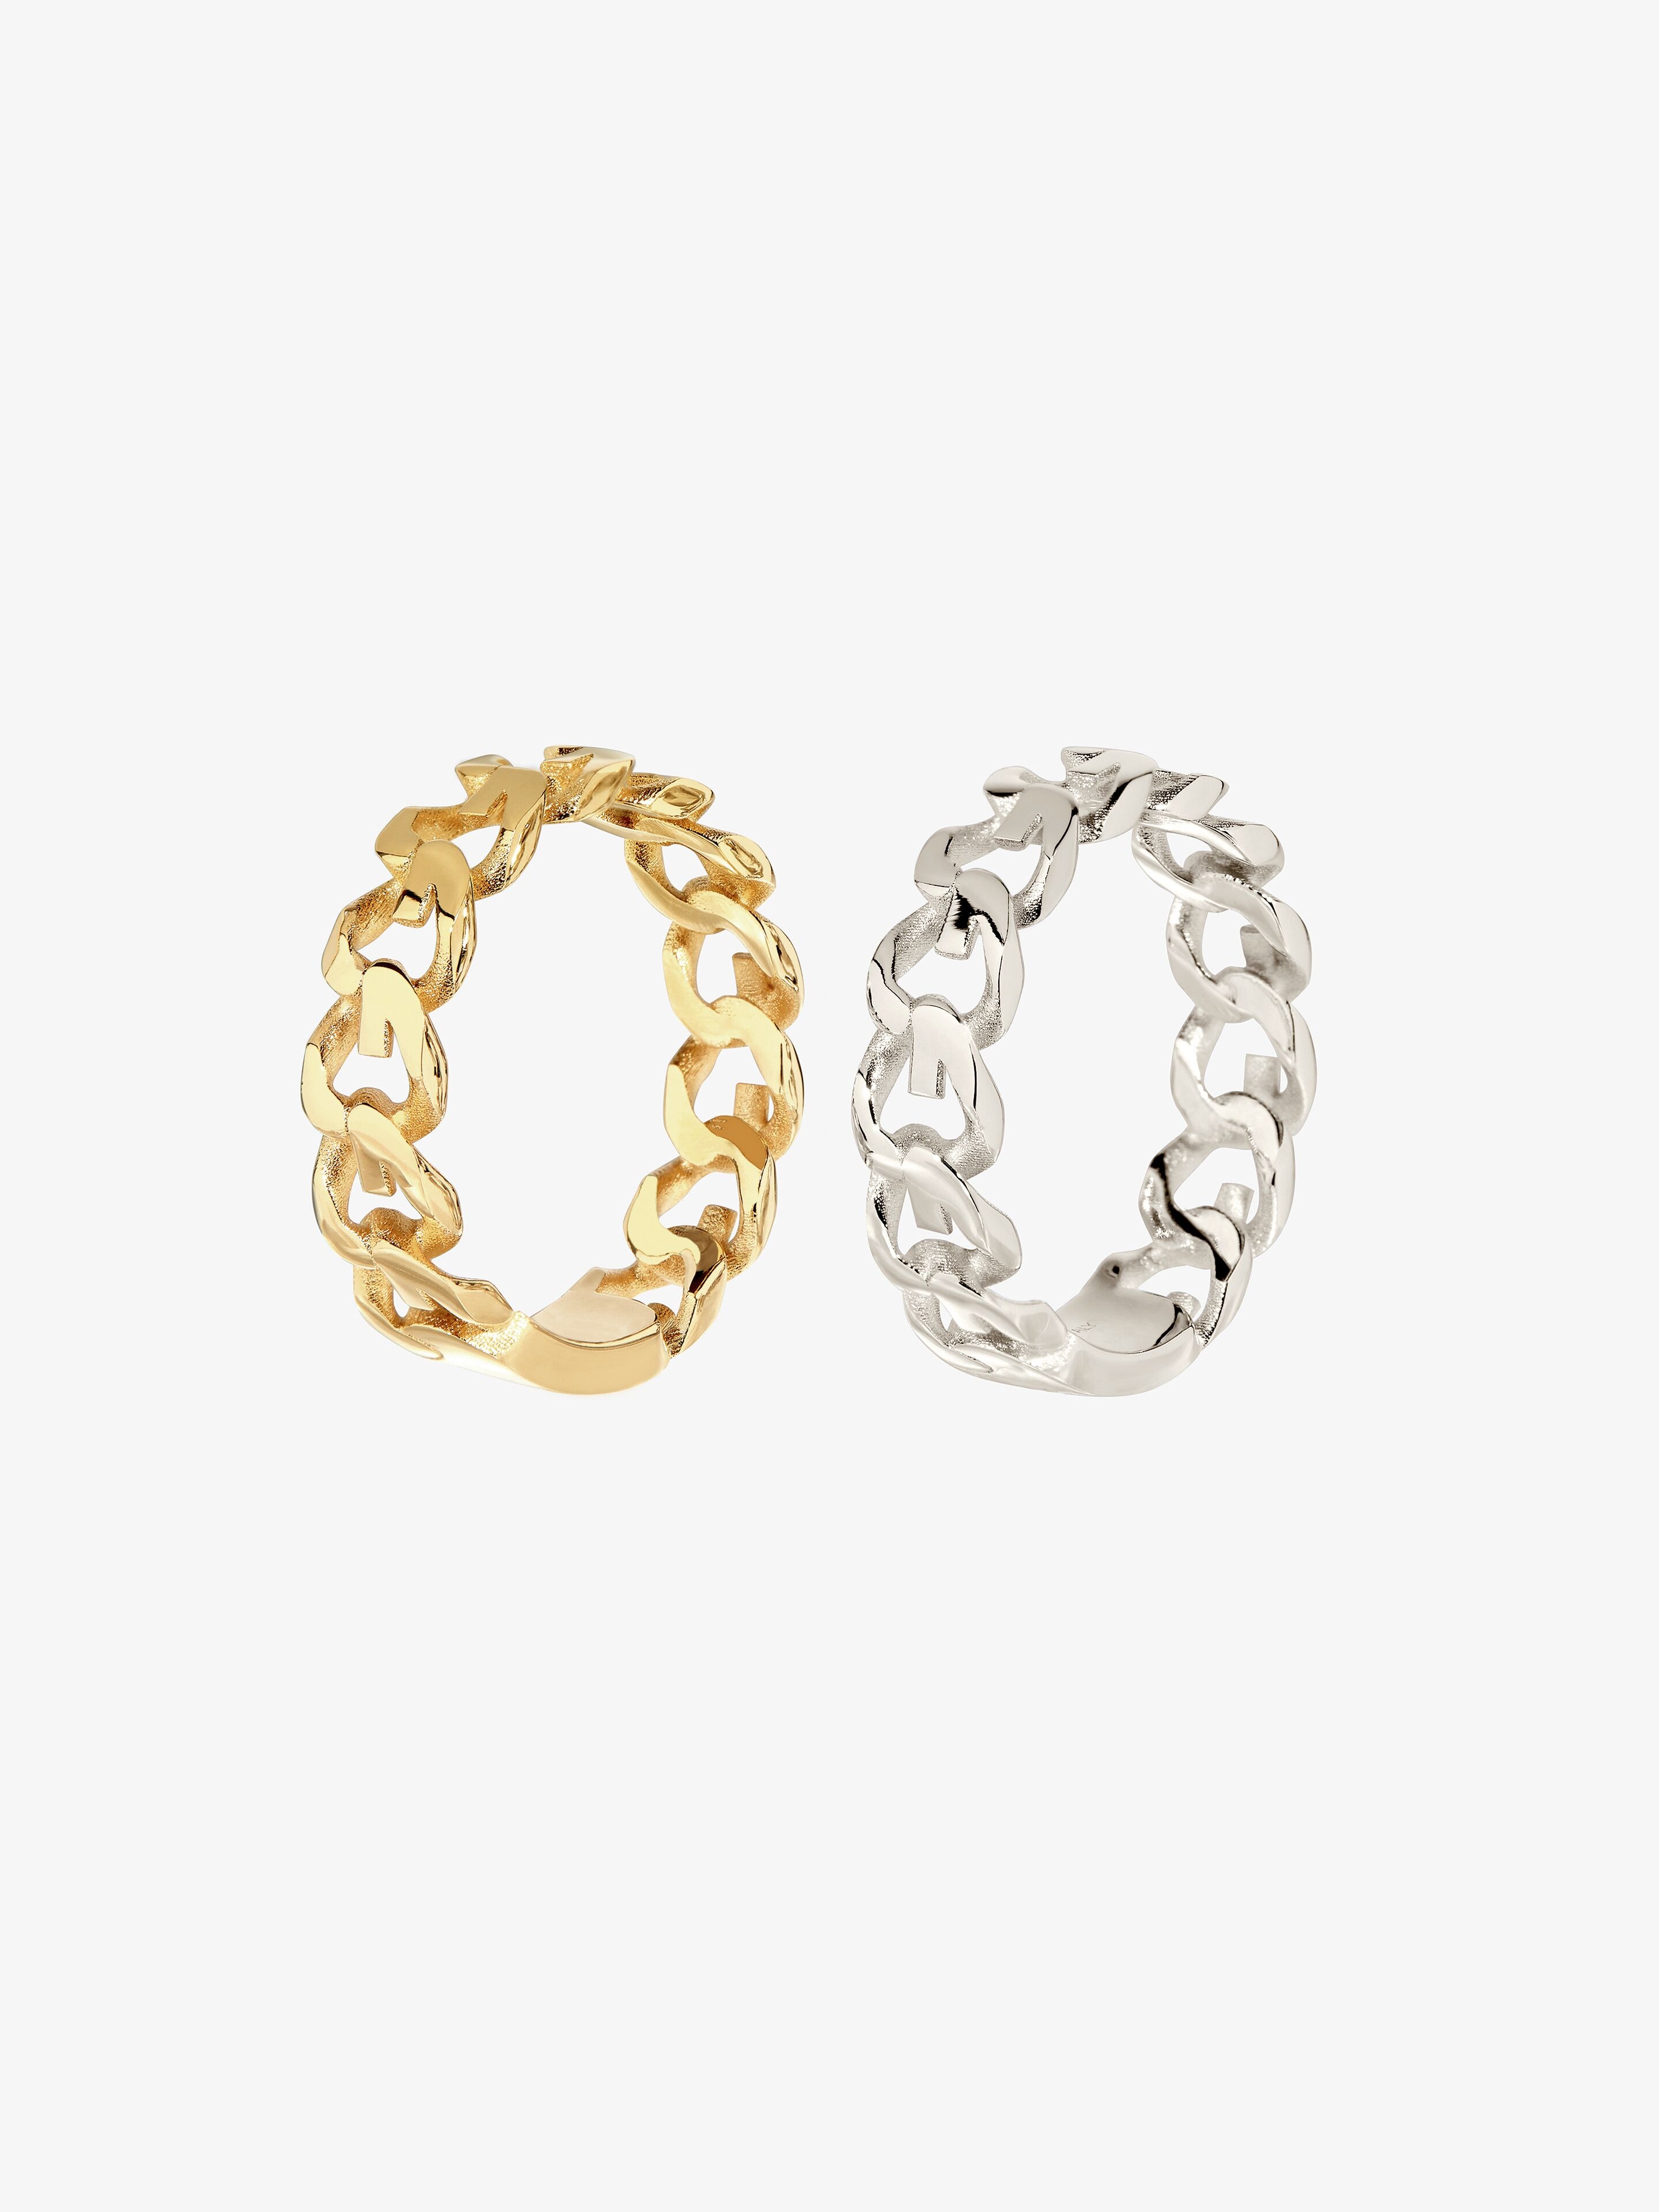 G CHAIN RING SET IN METAL - 4